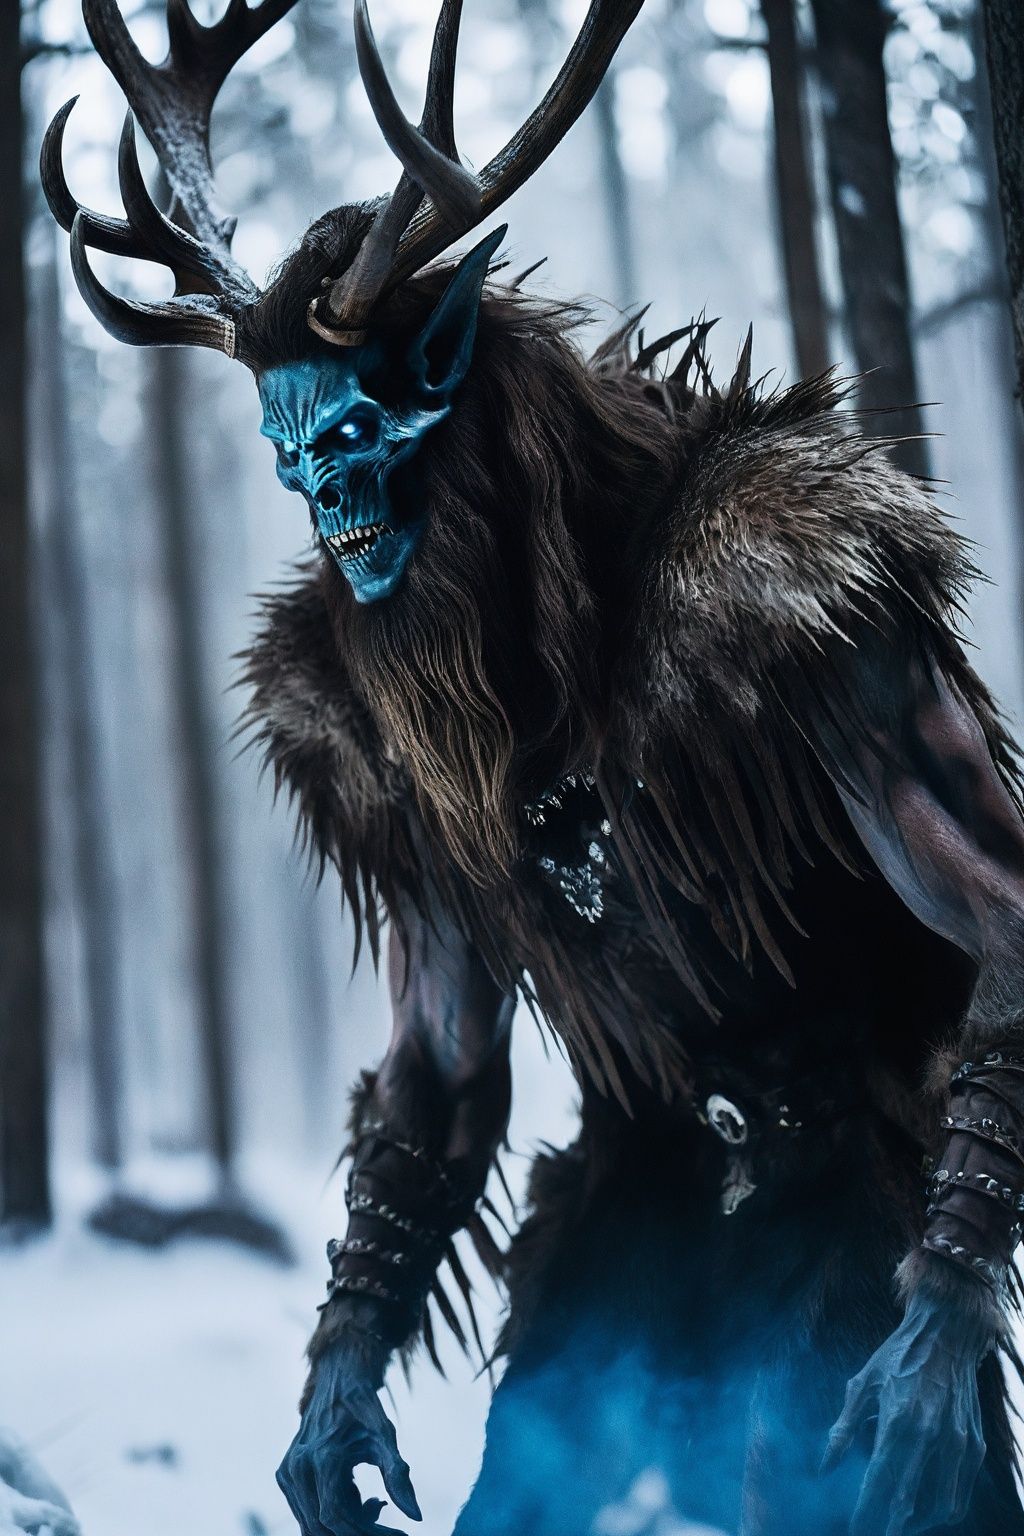 cinematic photo cinematic photo,western fantasy,Intimidating Wendigo emerging from the shadows,Gaunt and skeletal figure with icy blue eyes,Long,ragged hair flowing in the wind,Snow-covered forest adding an eerie backdrop,Moonlight casting an ethereal glow,Sinister aura evoking fear and suspense,Cinematic framing highlighting the tension,Dramatic lighting emphasizing the creature's features,Focal length 85mm,aperture f/2.8,ISO 200,shutter speed 1/160., . 35mm photograph, film, bokeh, professional, 4k, highly detailed